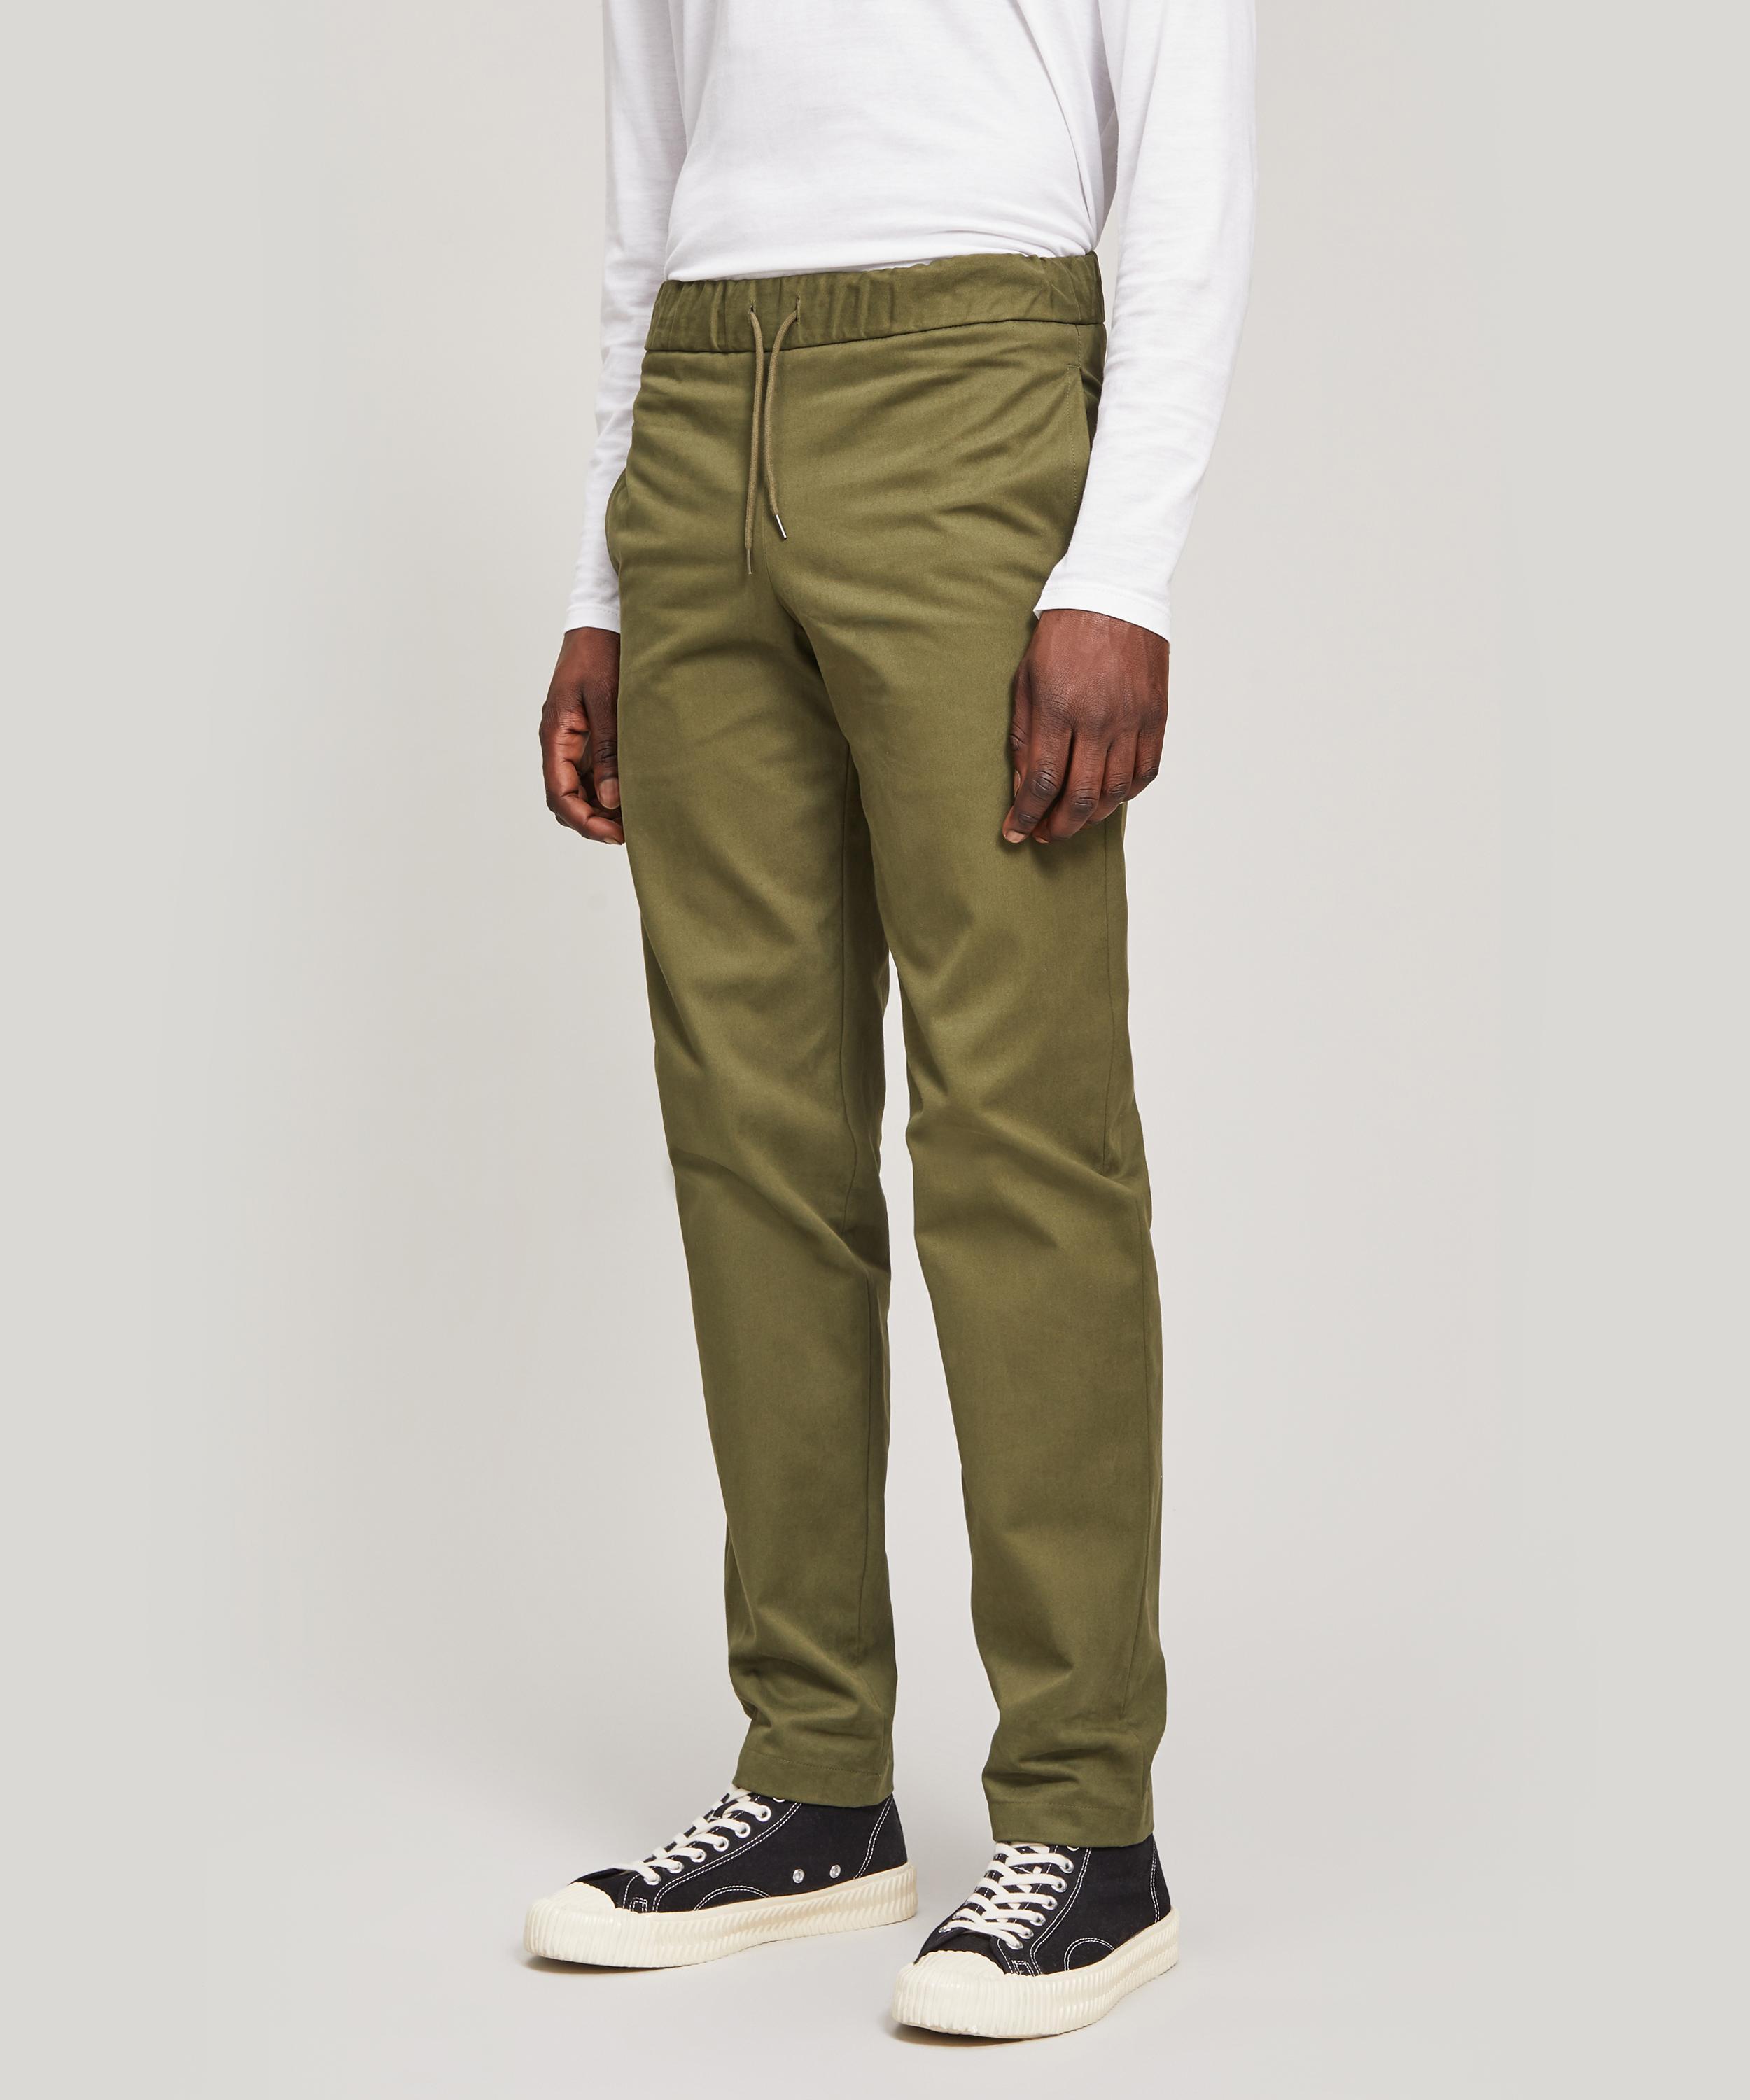 A.P.C. Cotton Kaplan Drawstring Trousers in Green for Men - Lyst